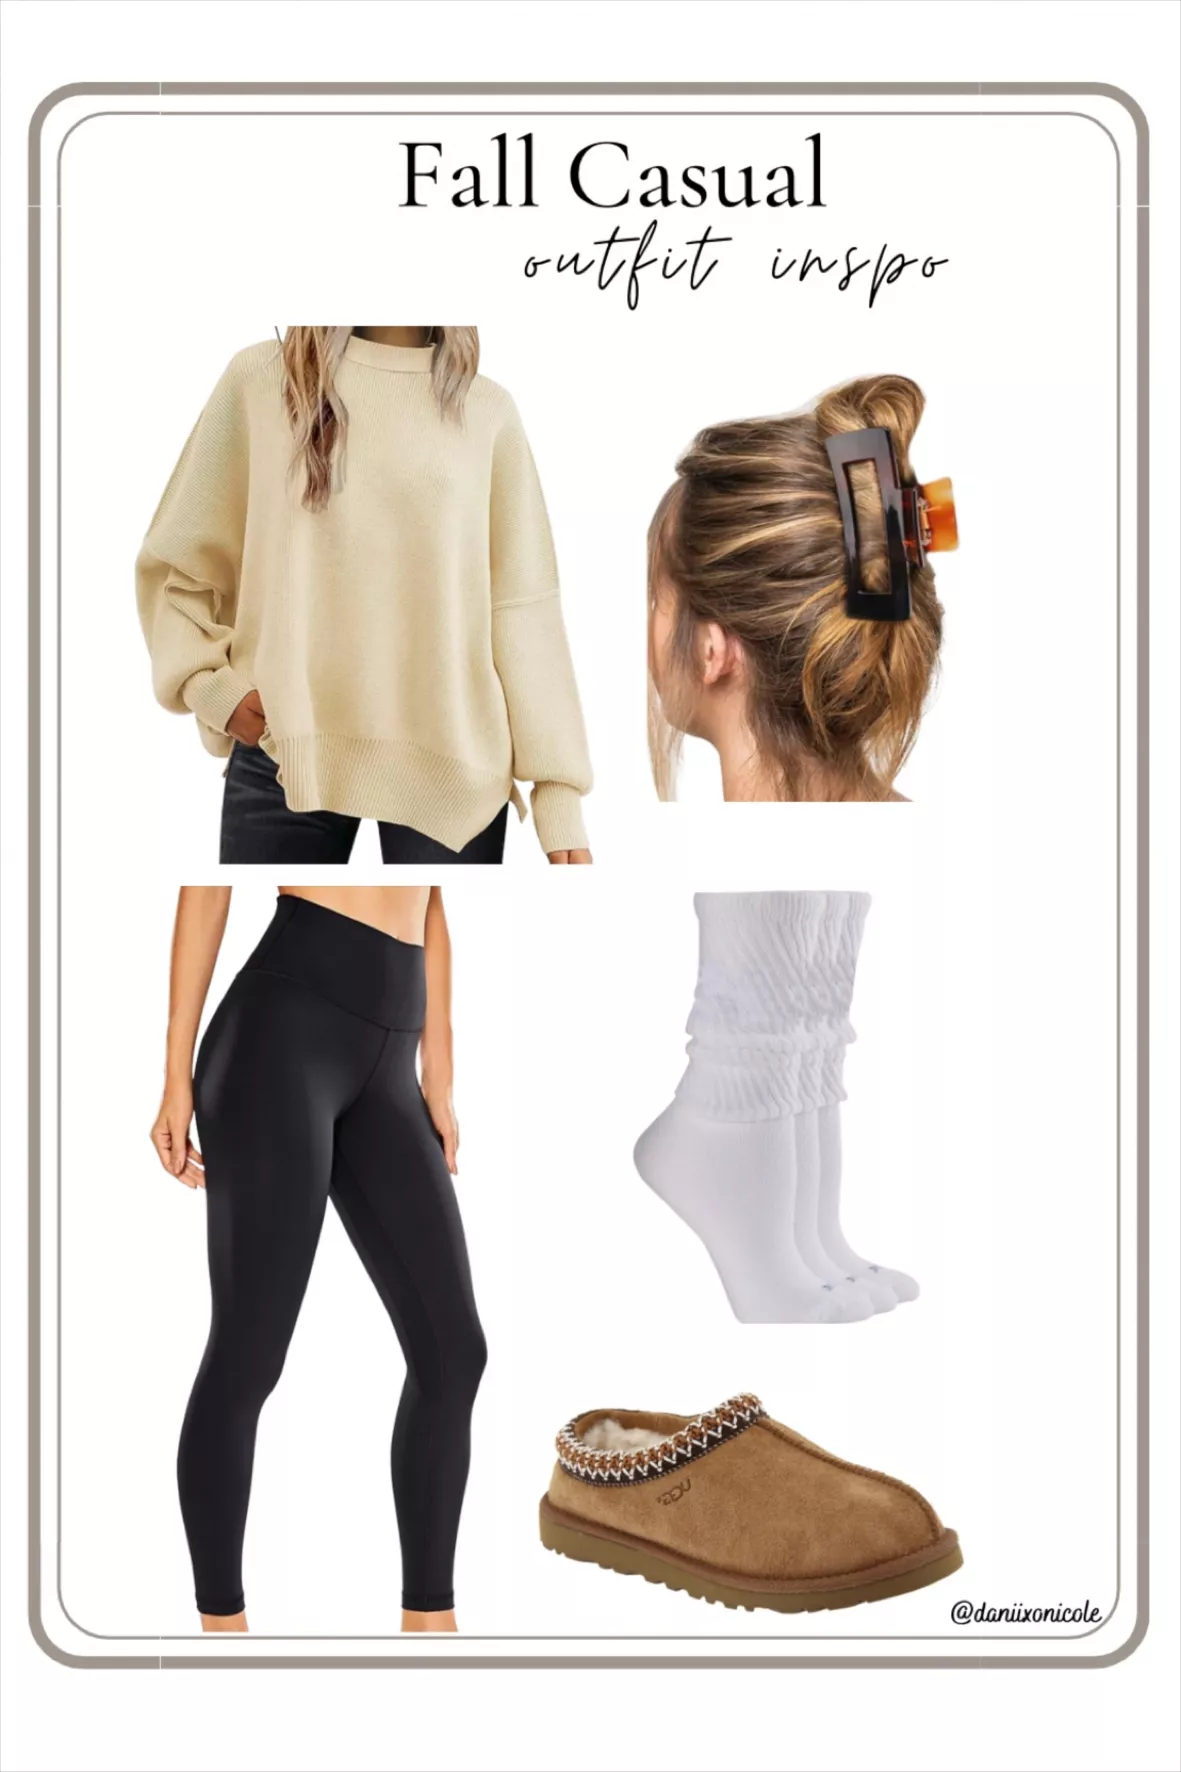 Ugg Slippers Outfits  Casual fall outfits, Slipper outfit, Outfit inspo  fall